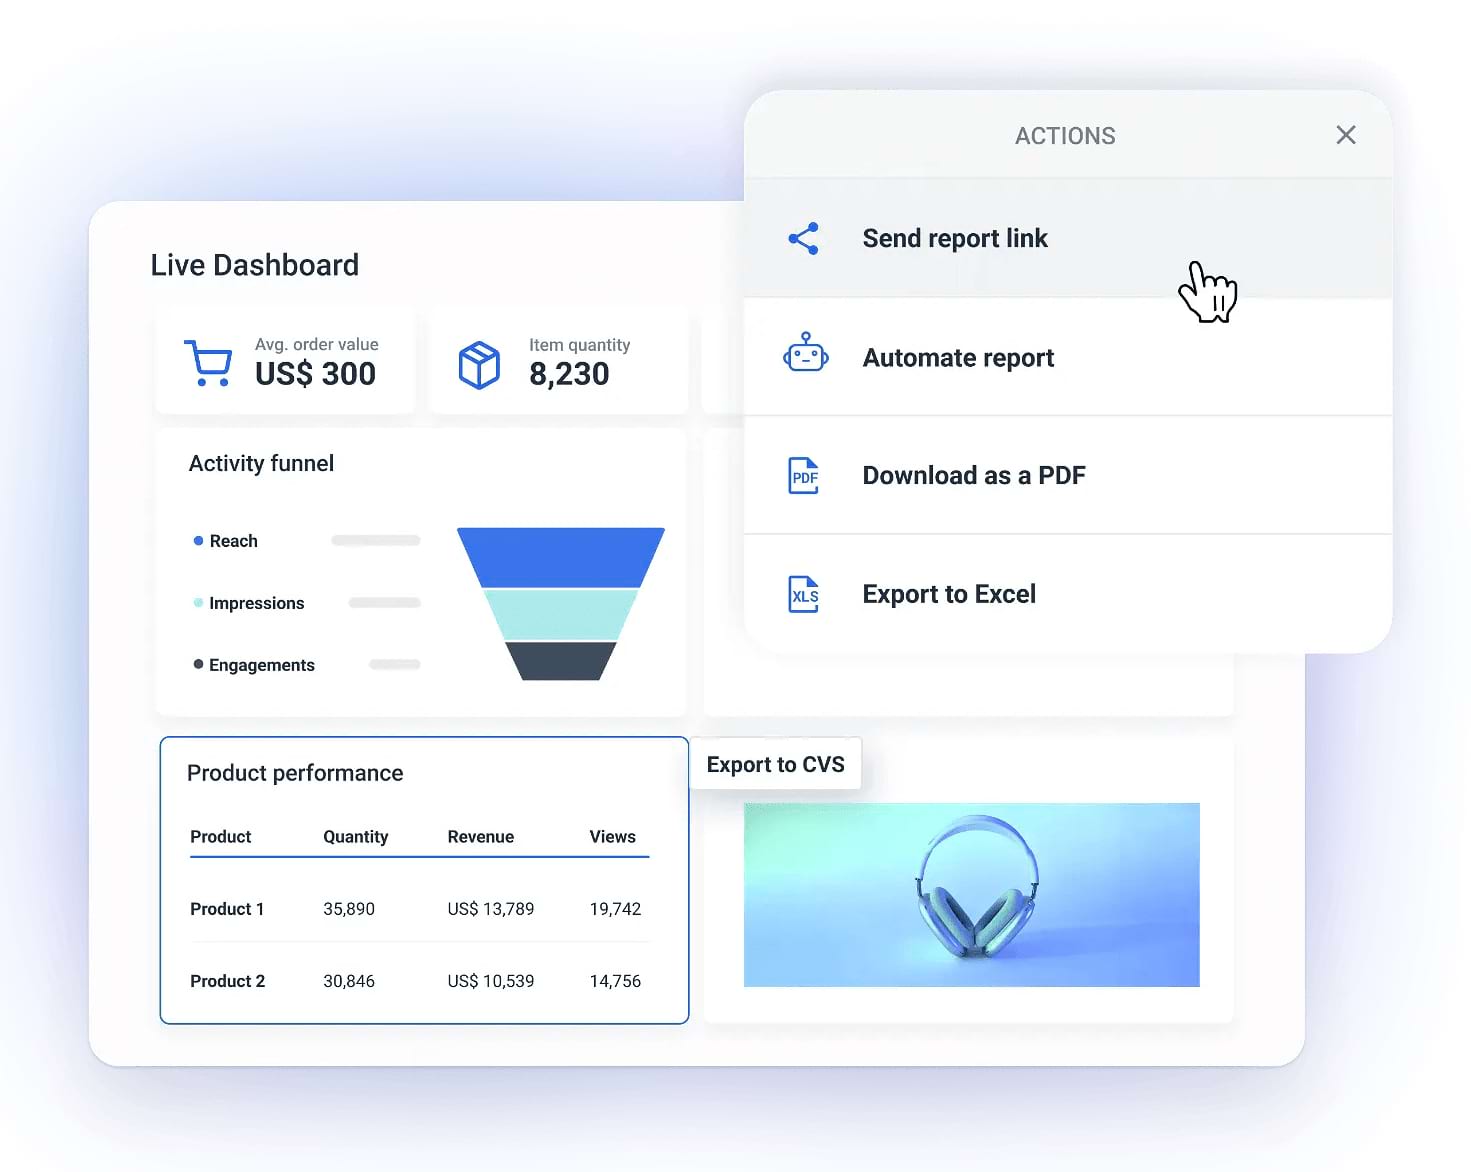 "Live Dashboard" overview from Whatagraph